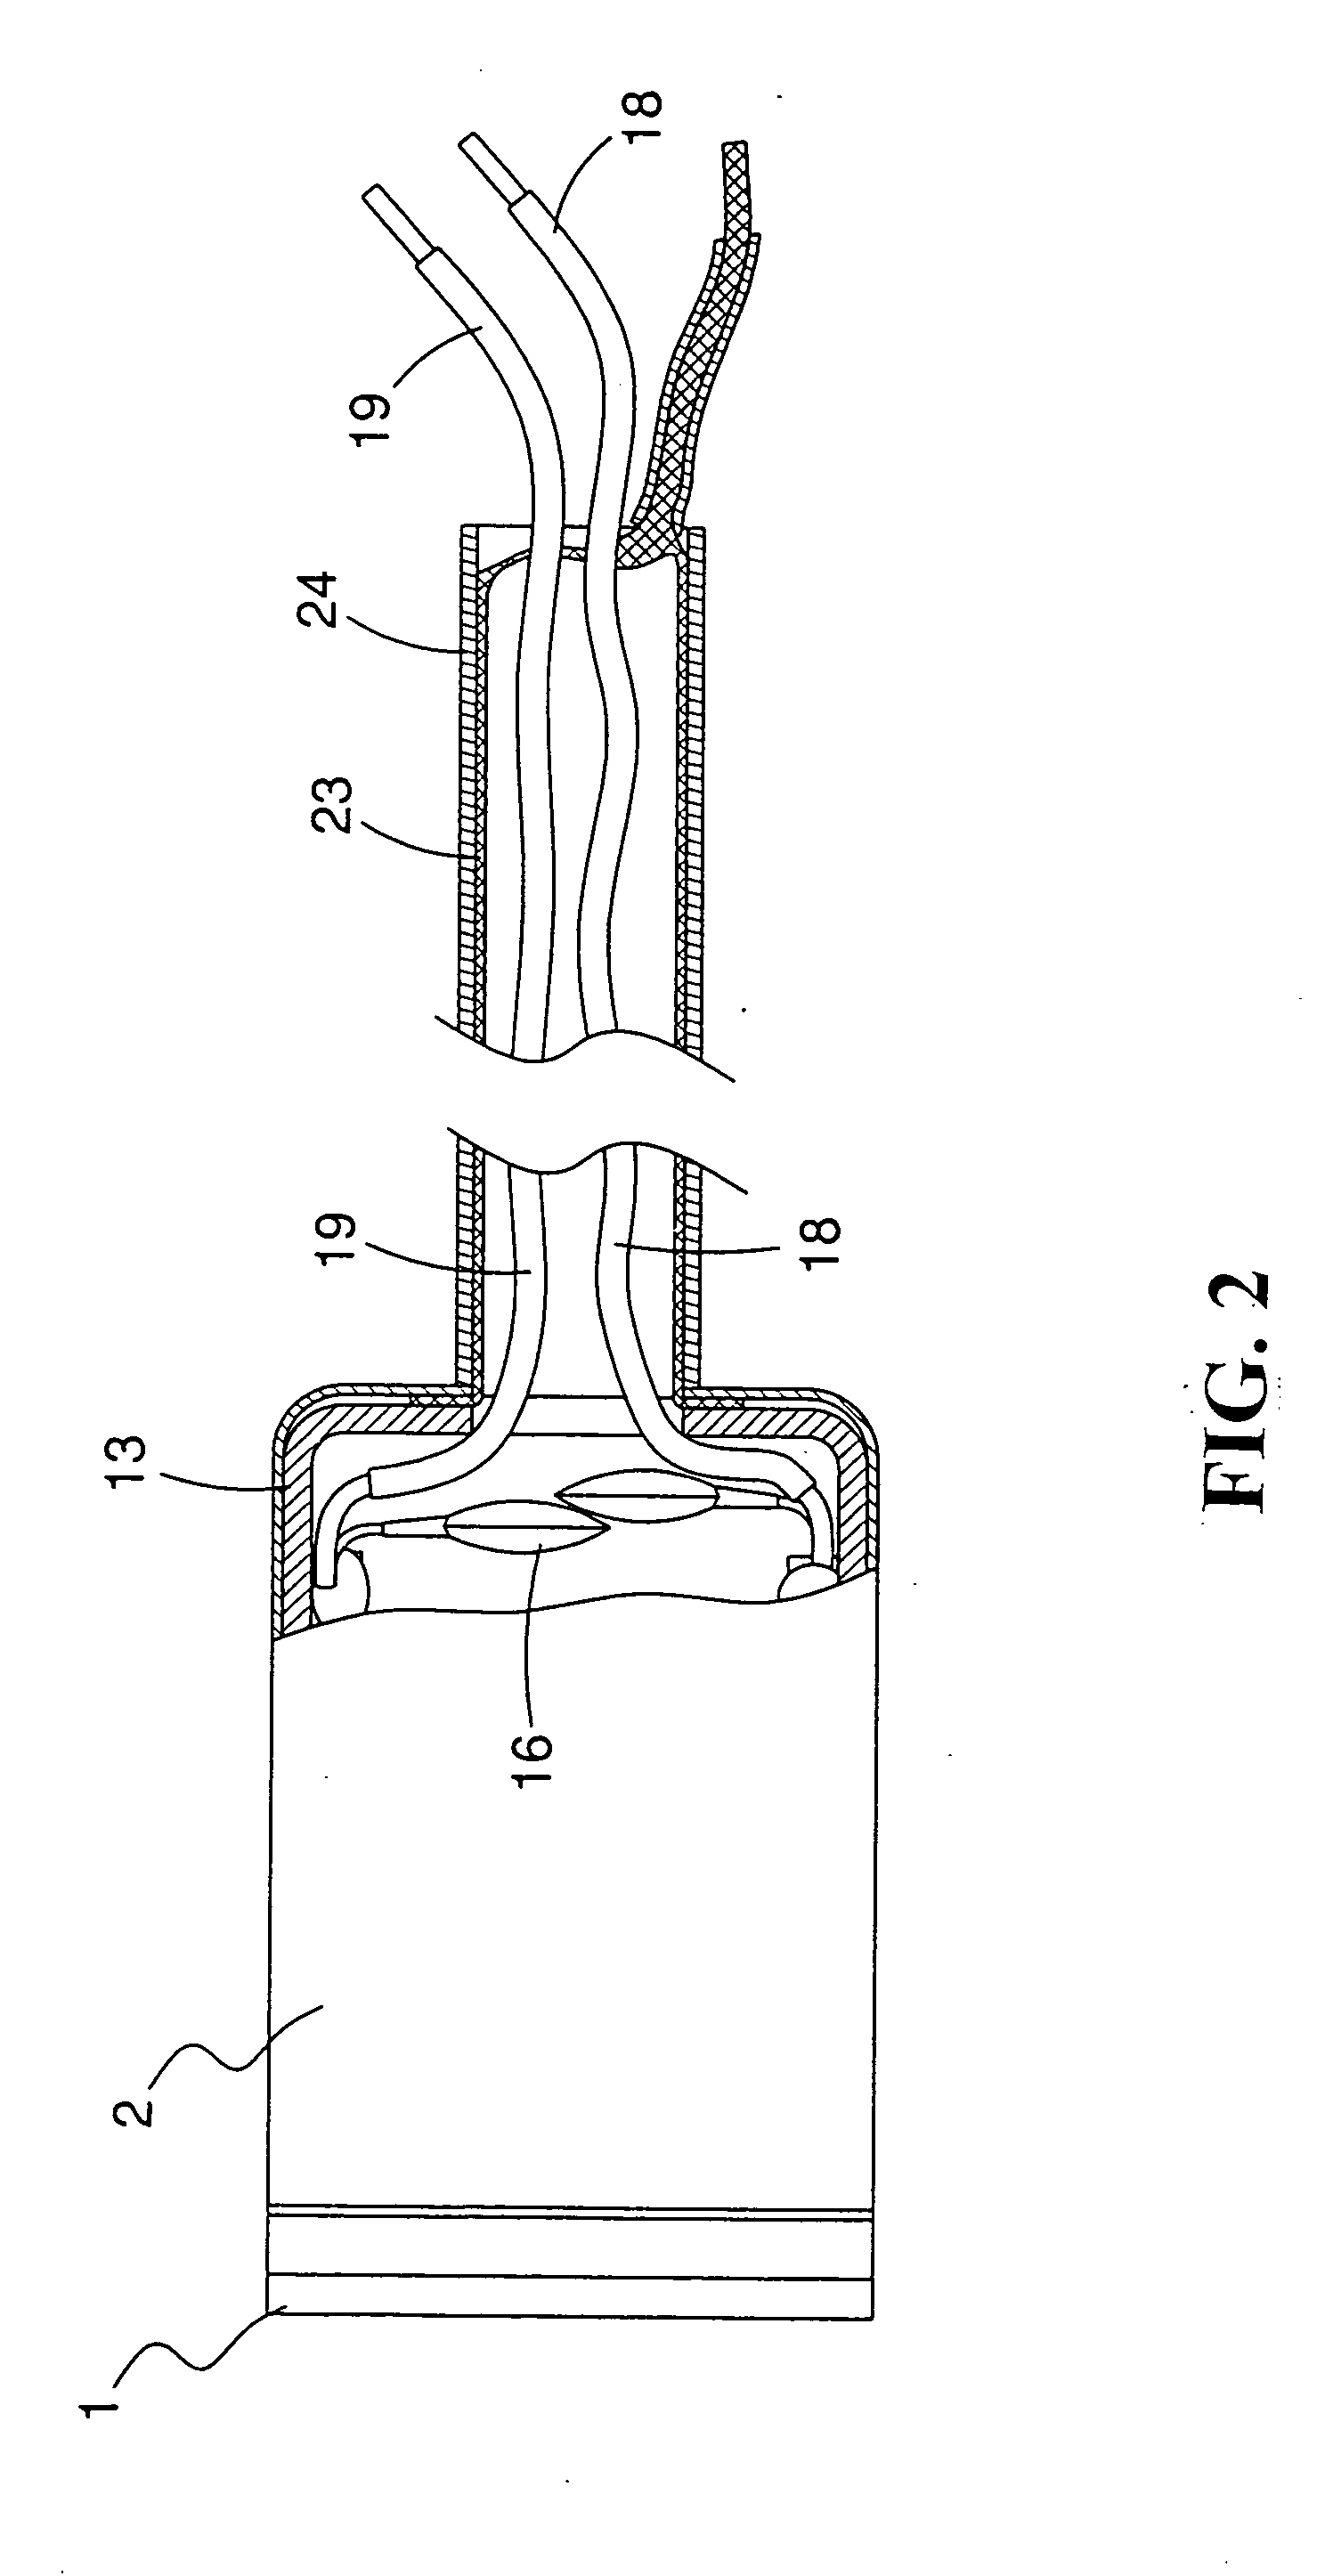 Filter structure and method of fabrication